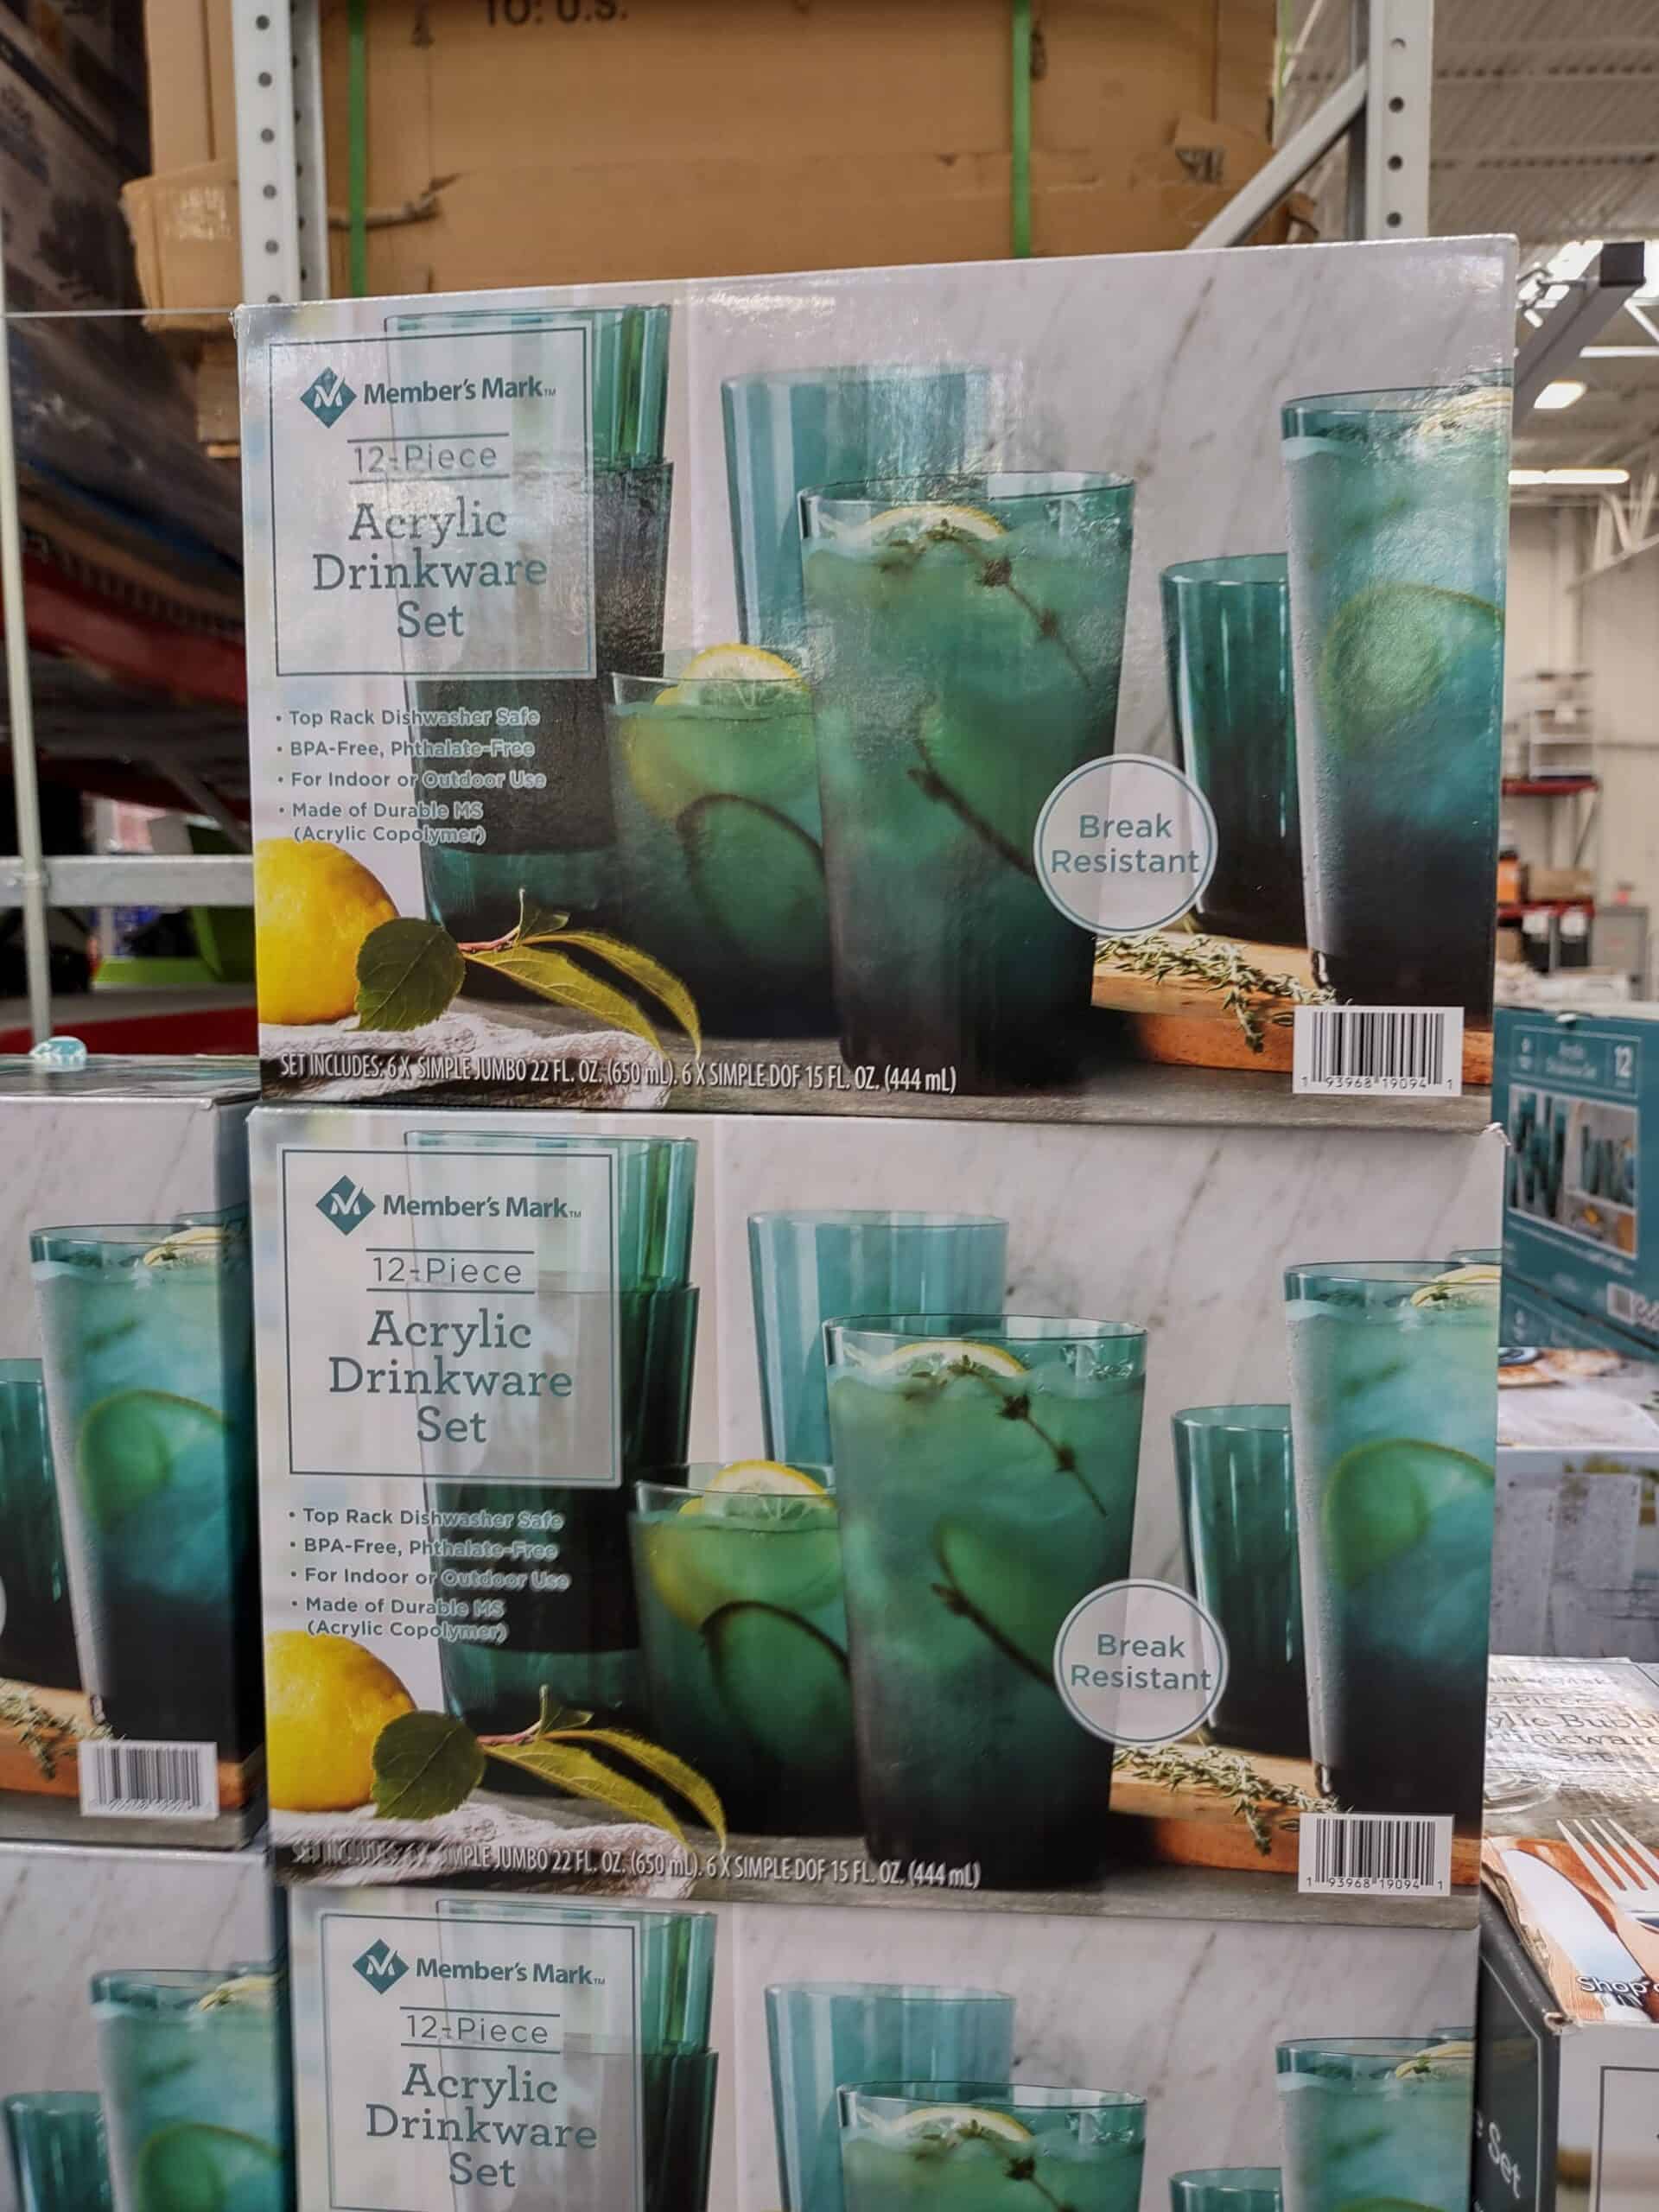 12pc Acrylic Drinkware Set on Clearance $11.91 at Sam’s